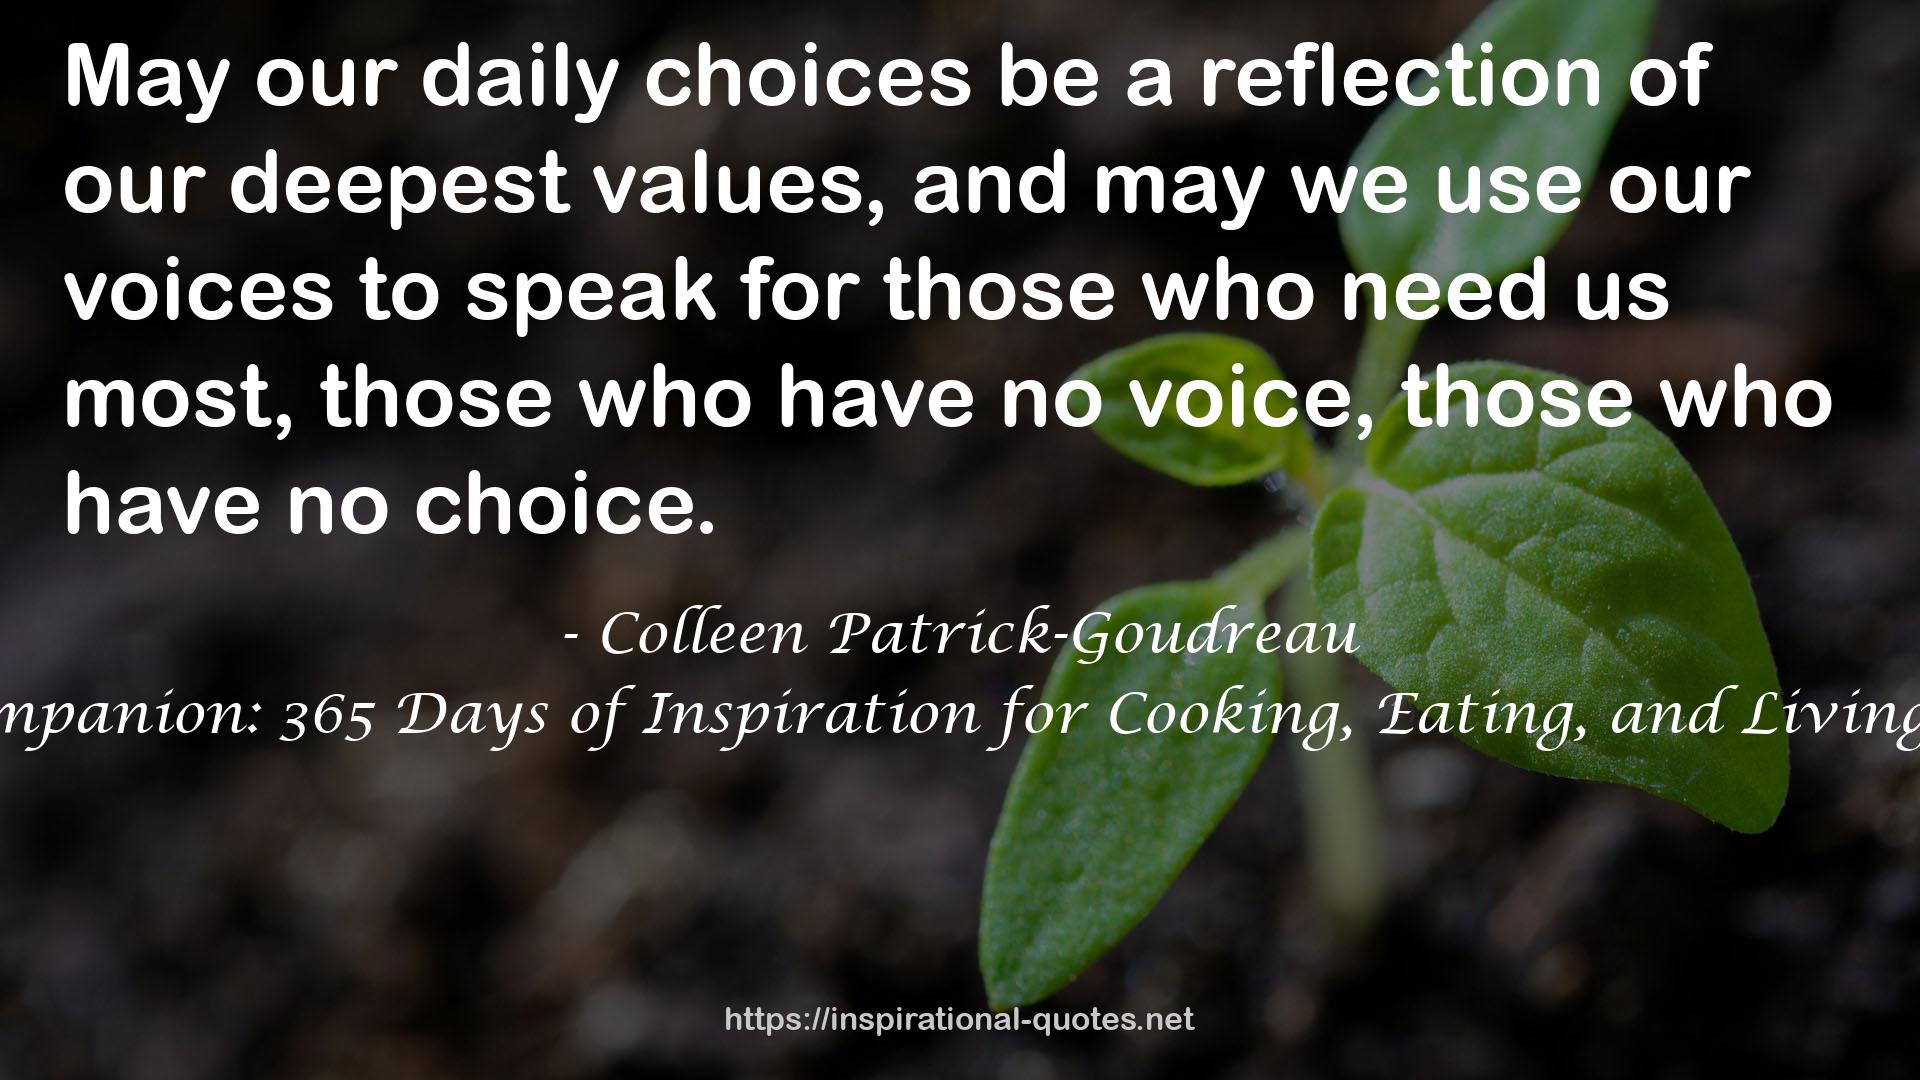 Vegan's Daily Companion: 365 Days of Inspiration for Cooking, Eating, and Living Compassionately QUOTES